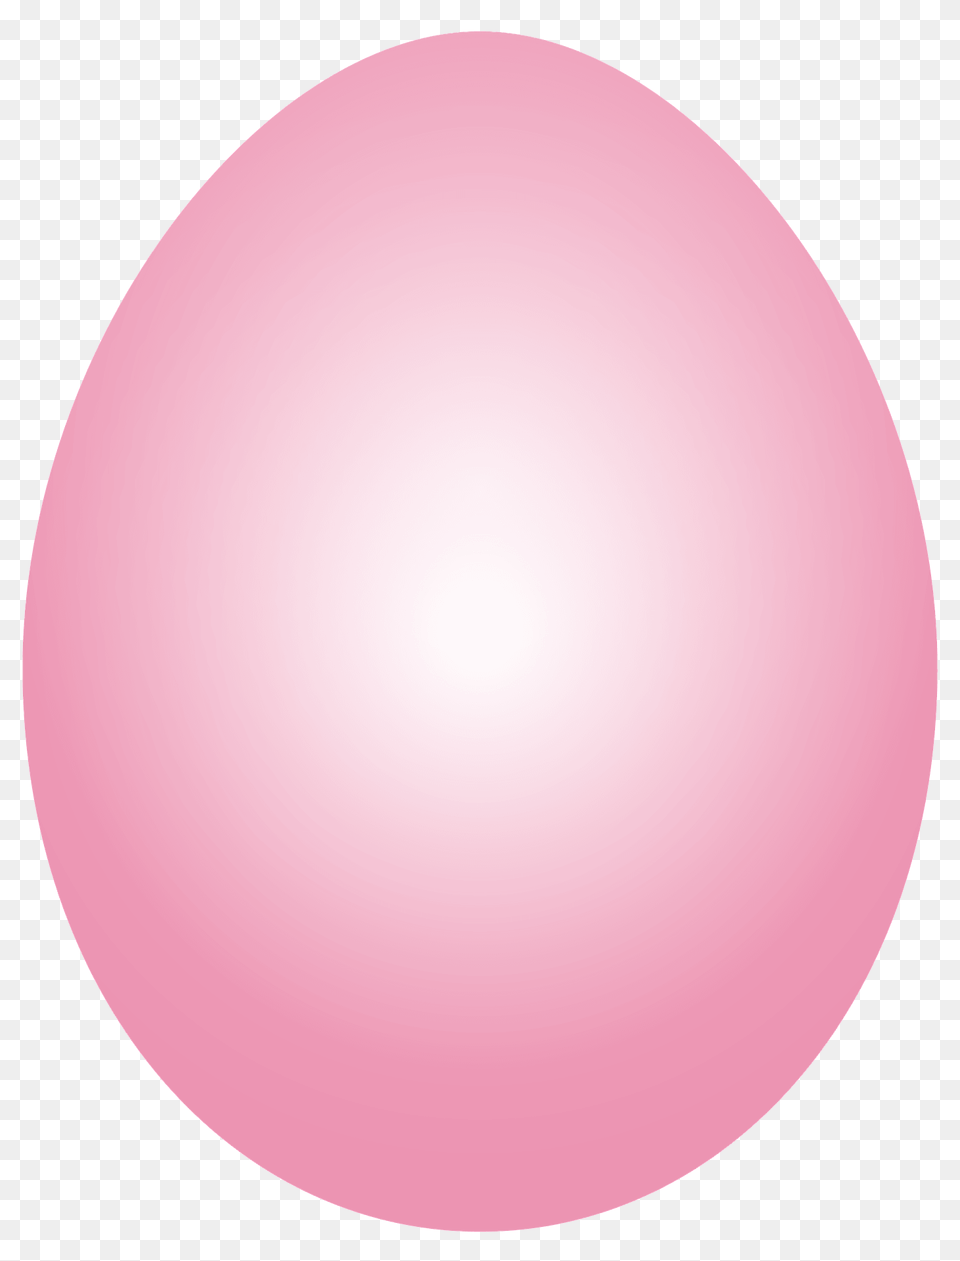 Pink Easter Egg Clipart, Balloon, Sphere Png